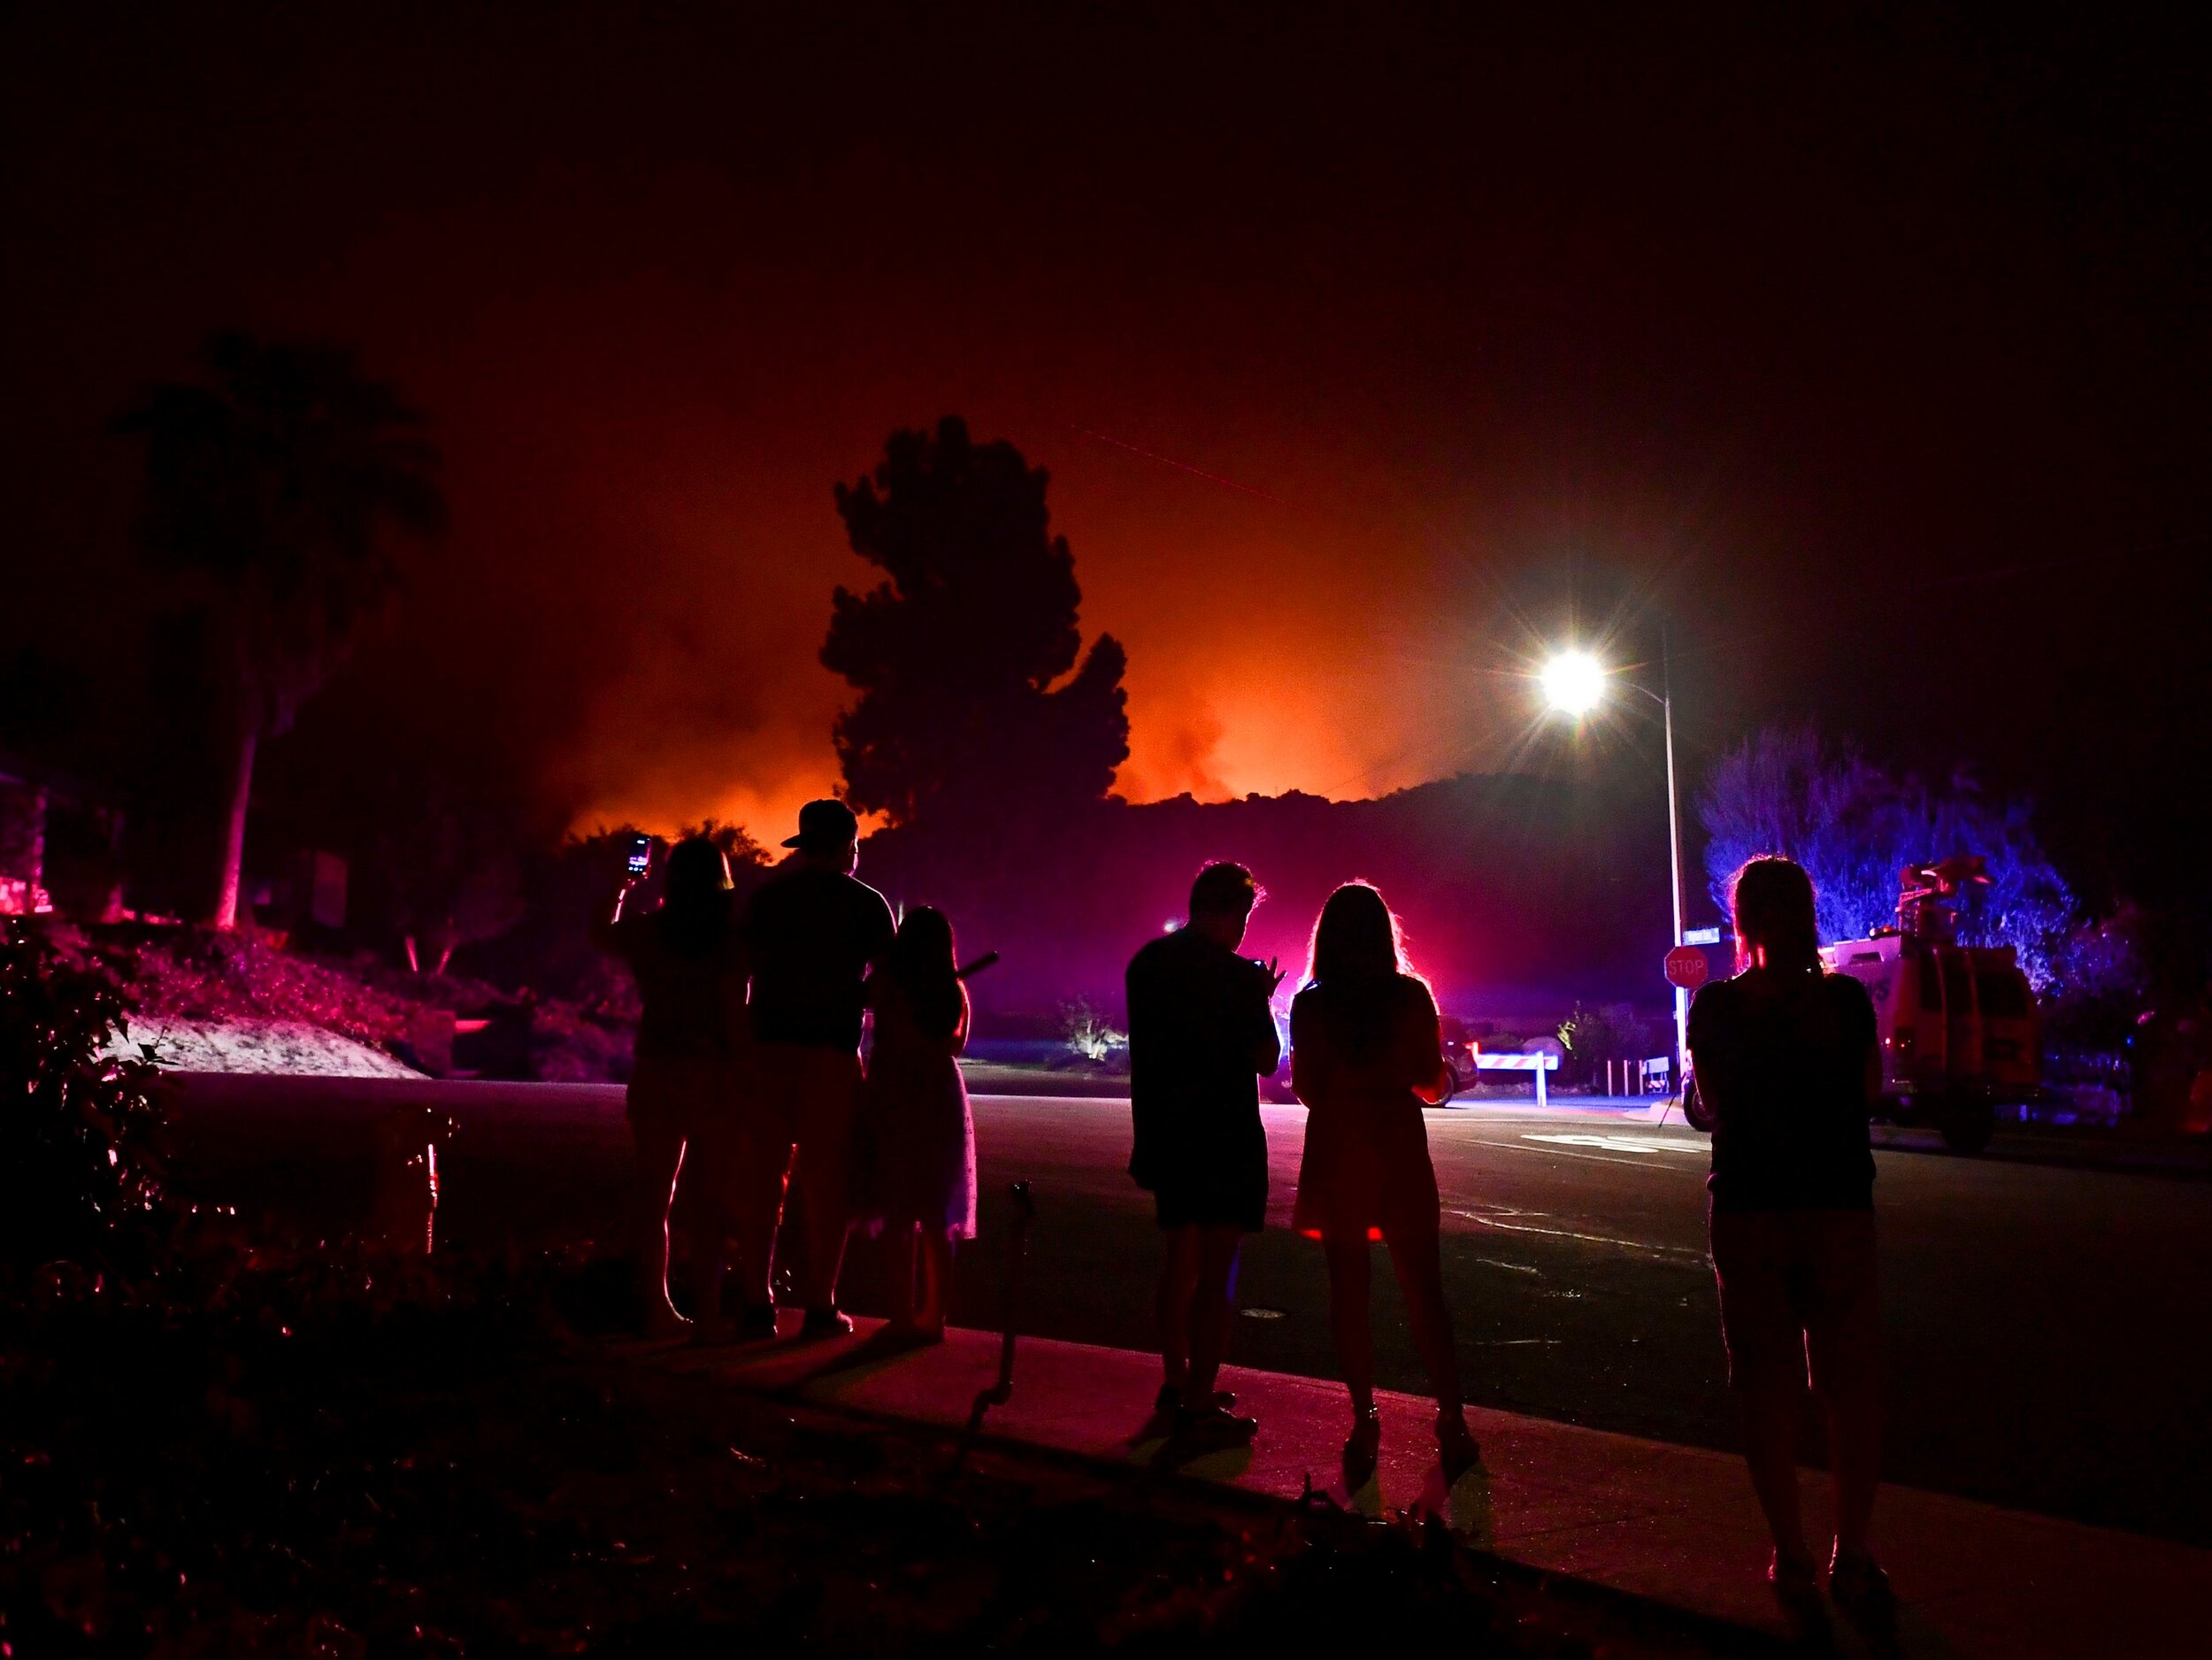 People watch as the Bobcat Fire burns on hillsides behind homes in Arcadia, California on September 13, 2020. (Frederic J. Brown / AFP via Getty Images)